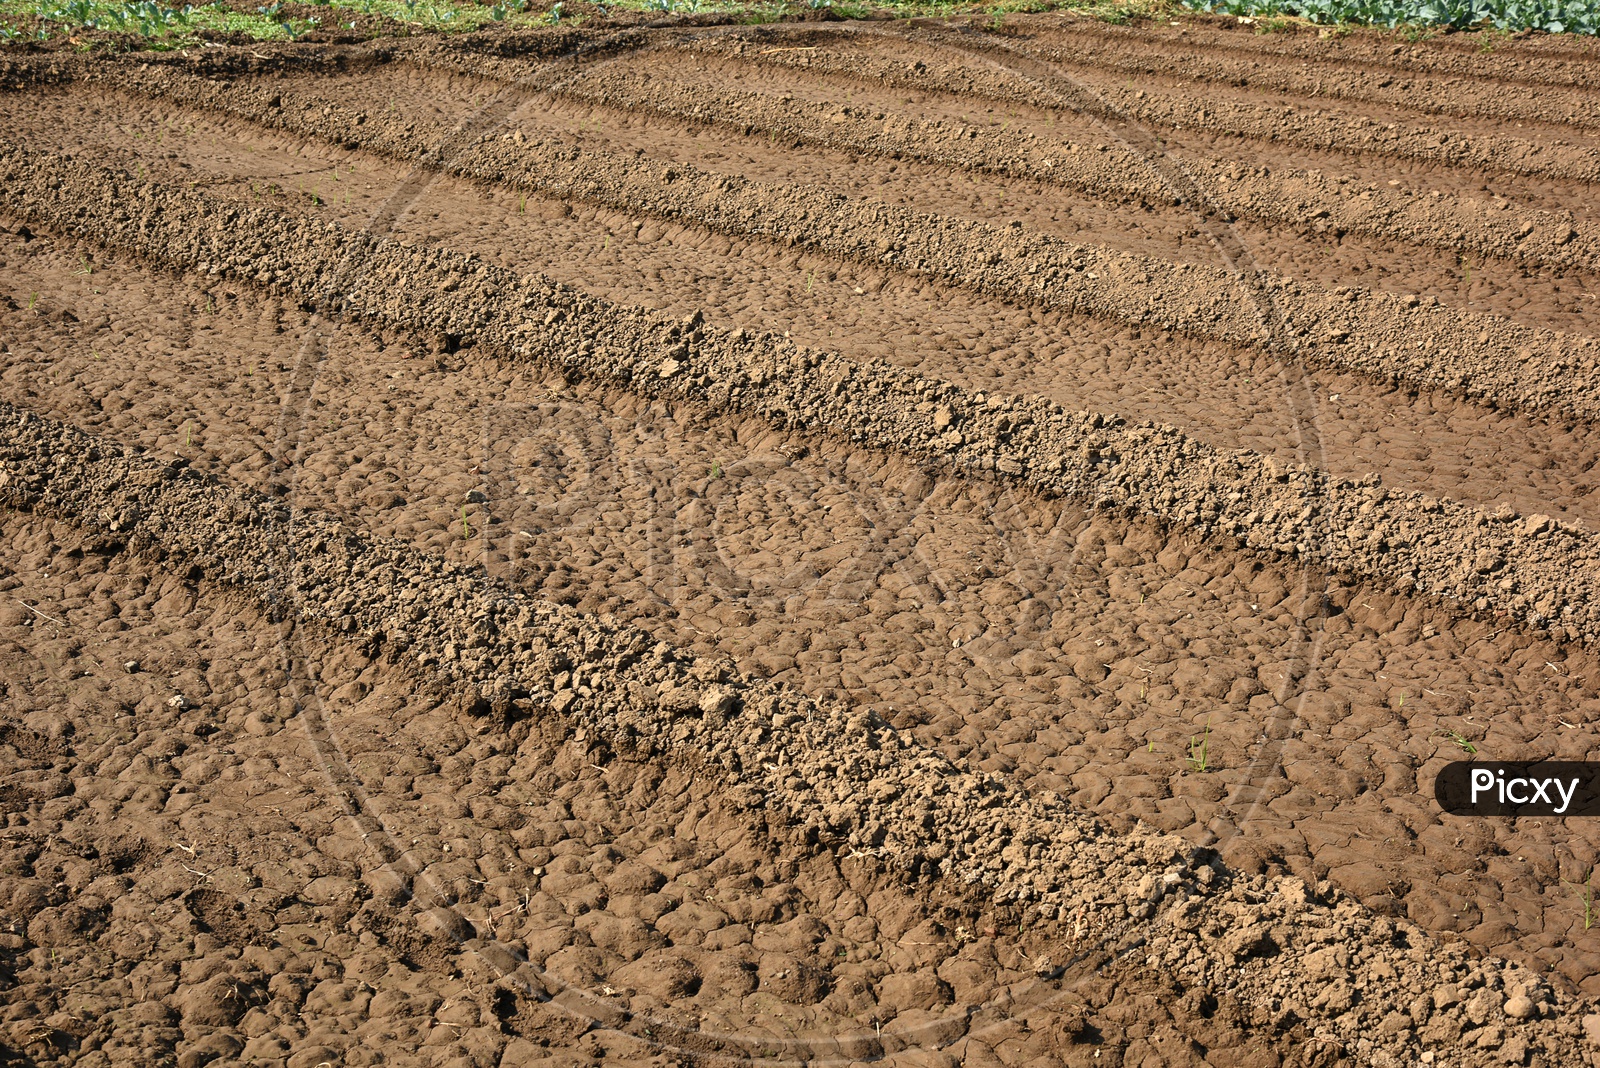 Wet Agricultural Lands For Planting Saplings As a Crop